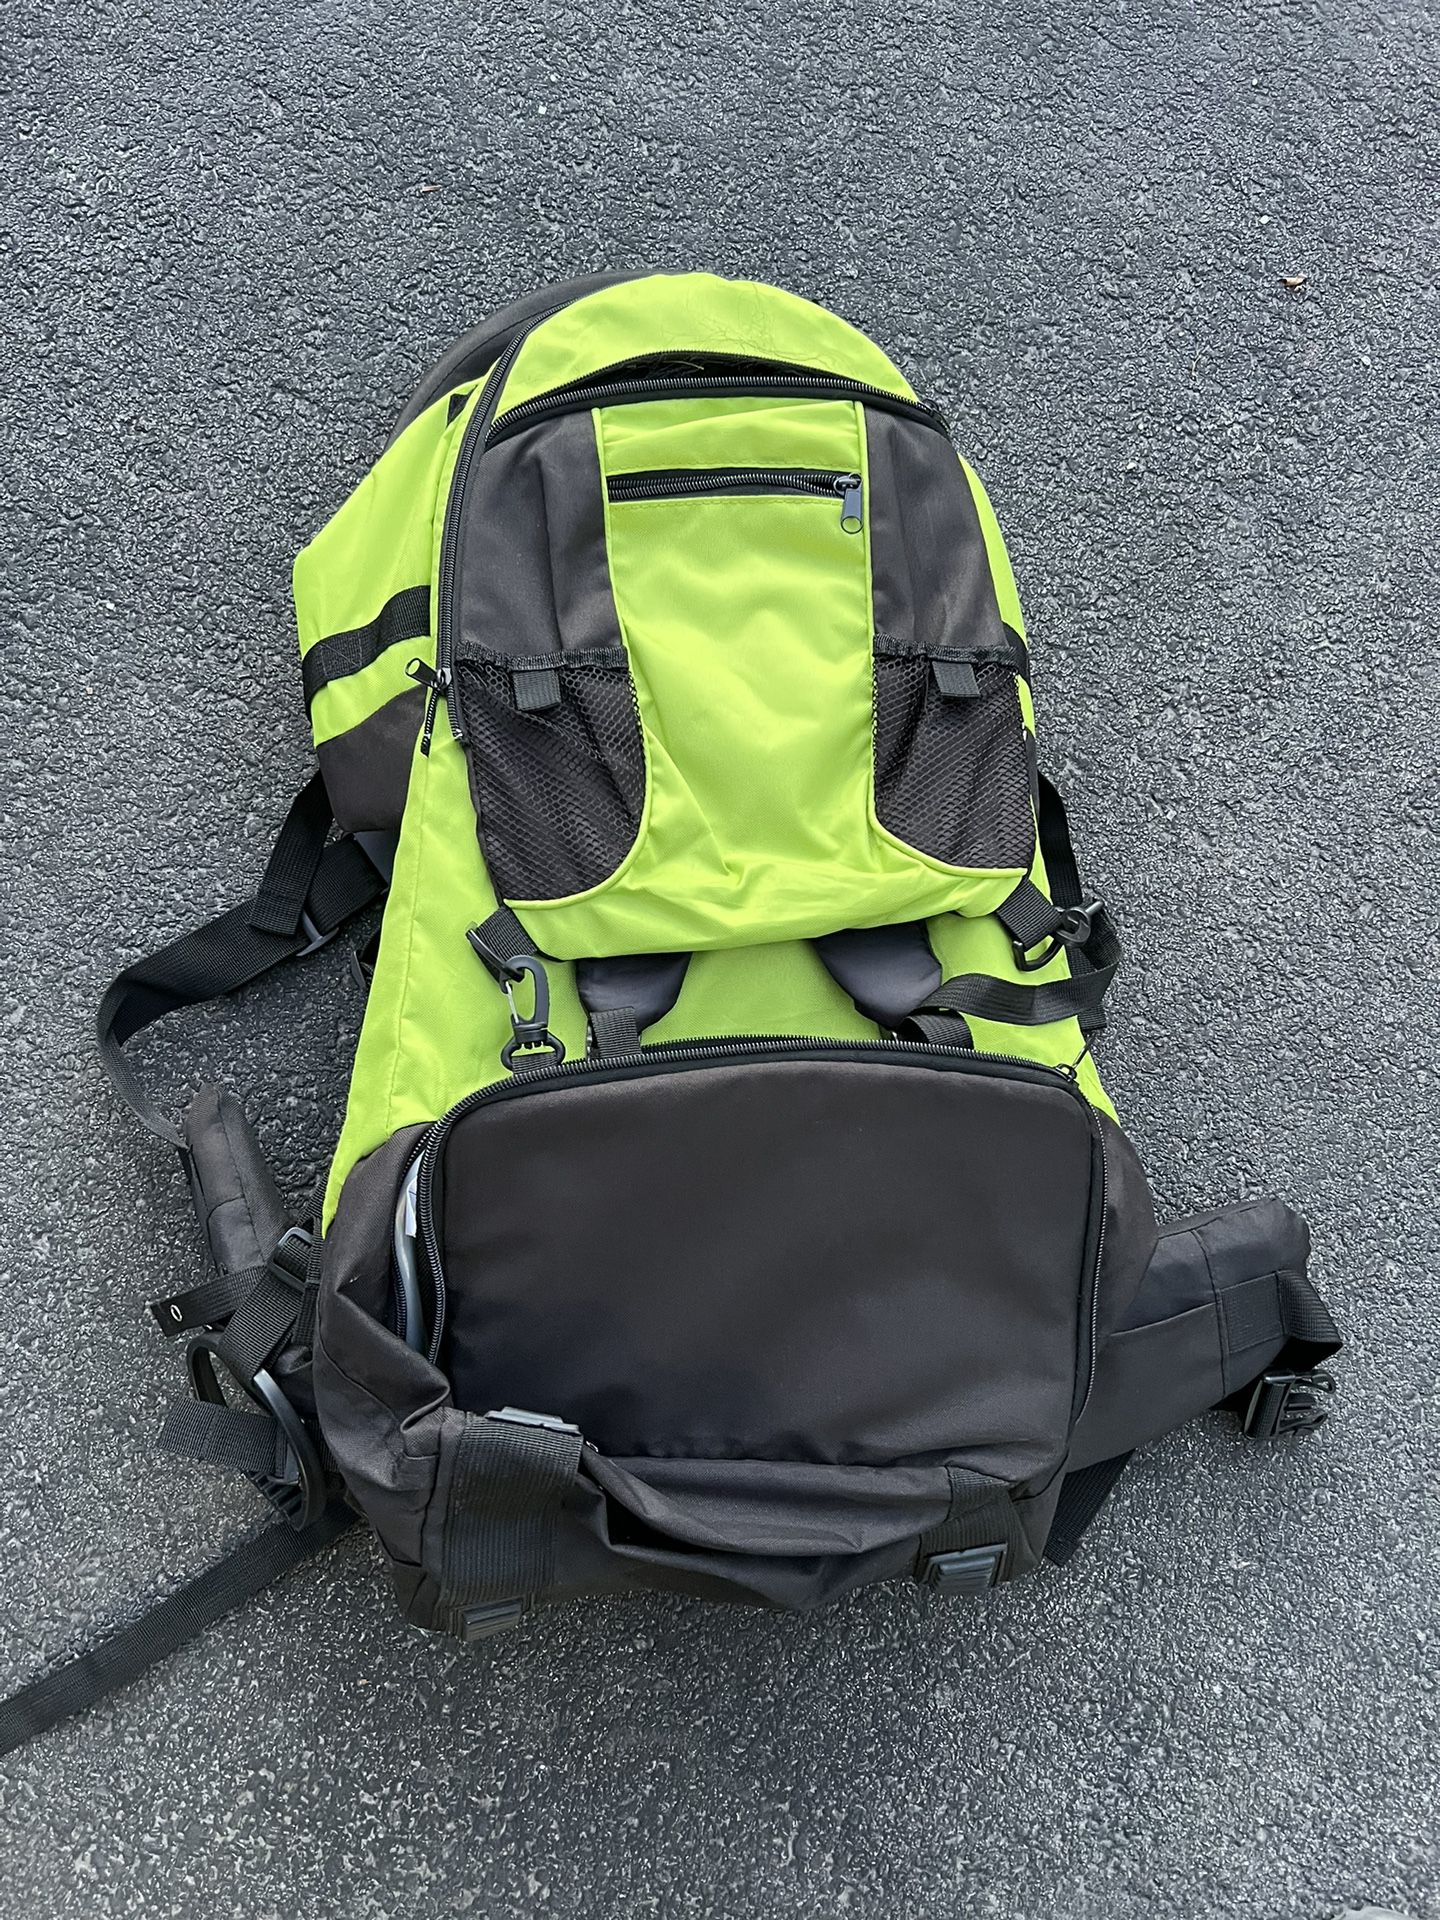 Hiking Backpack / Child Carrier 